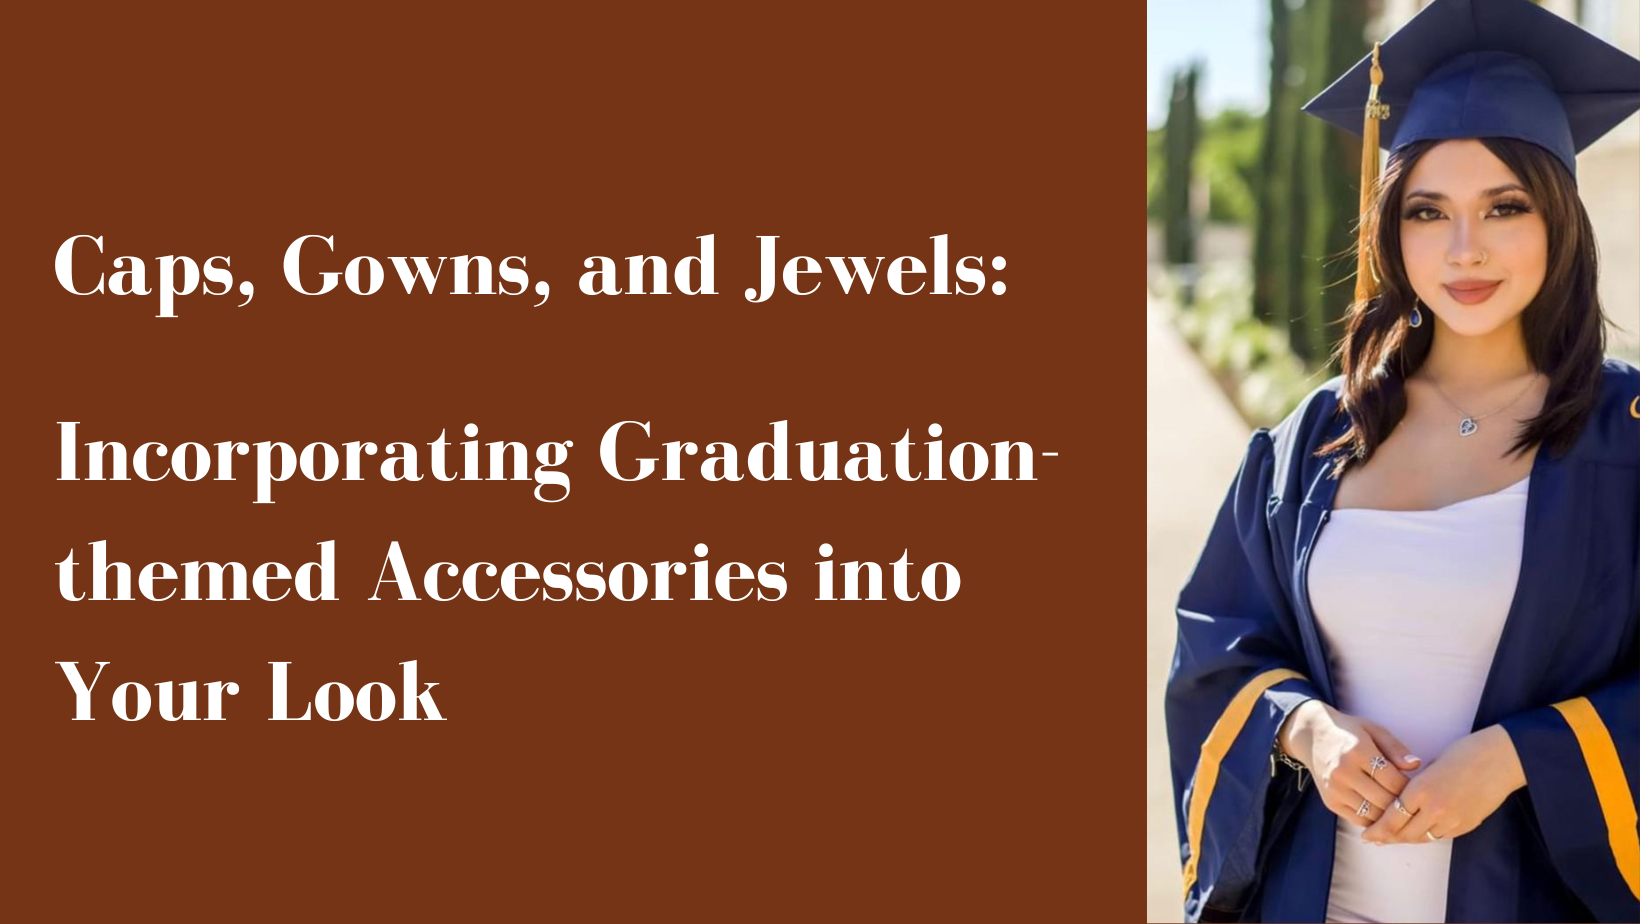 Caps, Gowns, and Jewels: Incorporating Graduation-themed Accessories into Your Look